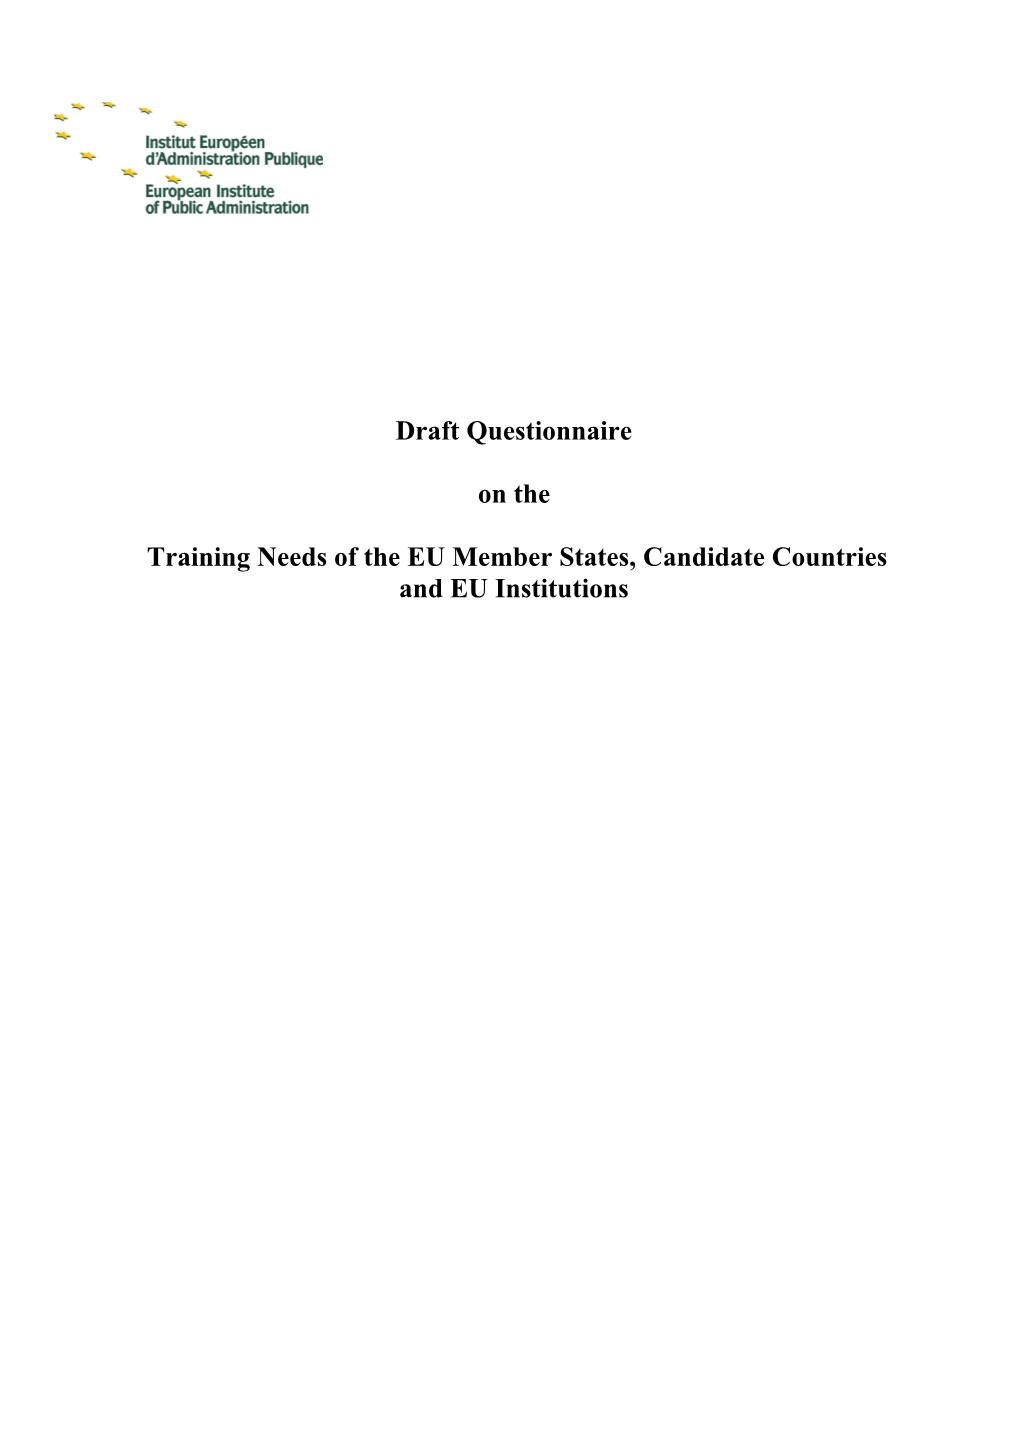 Training Needs of the EU Member States, Candidate Countries and EU Institutions